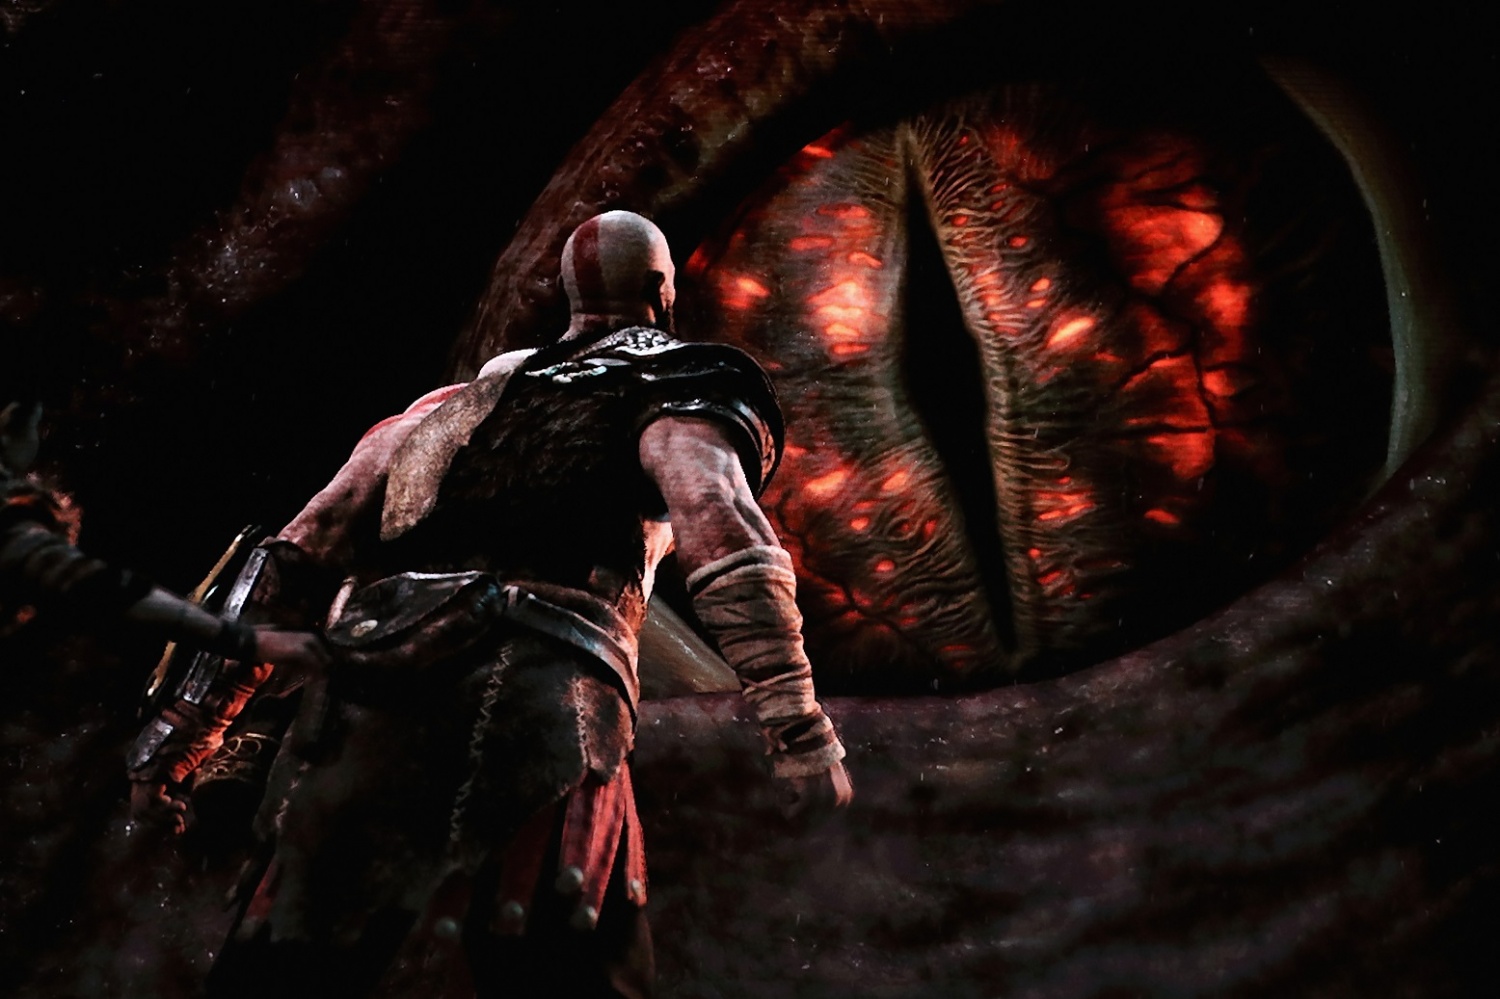  'God of War' for the PS4 is revealed during the Sony Playstation E3 conference at the Shrine Auditorium on June 12, 2017 in Los Angeles, California. The E3 Game Conference begins on Tuesday June 13. (Photo by Christian Petersen/Getty Images)